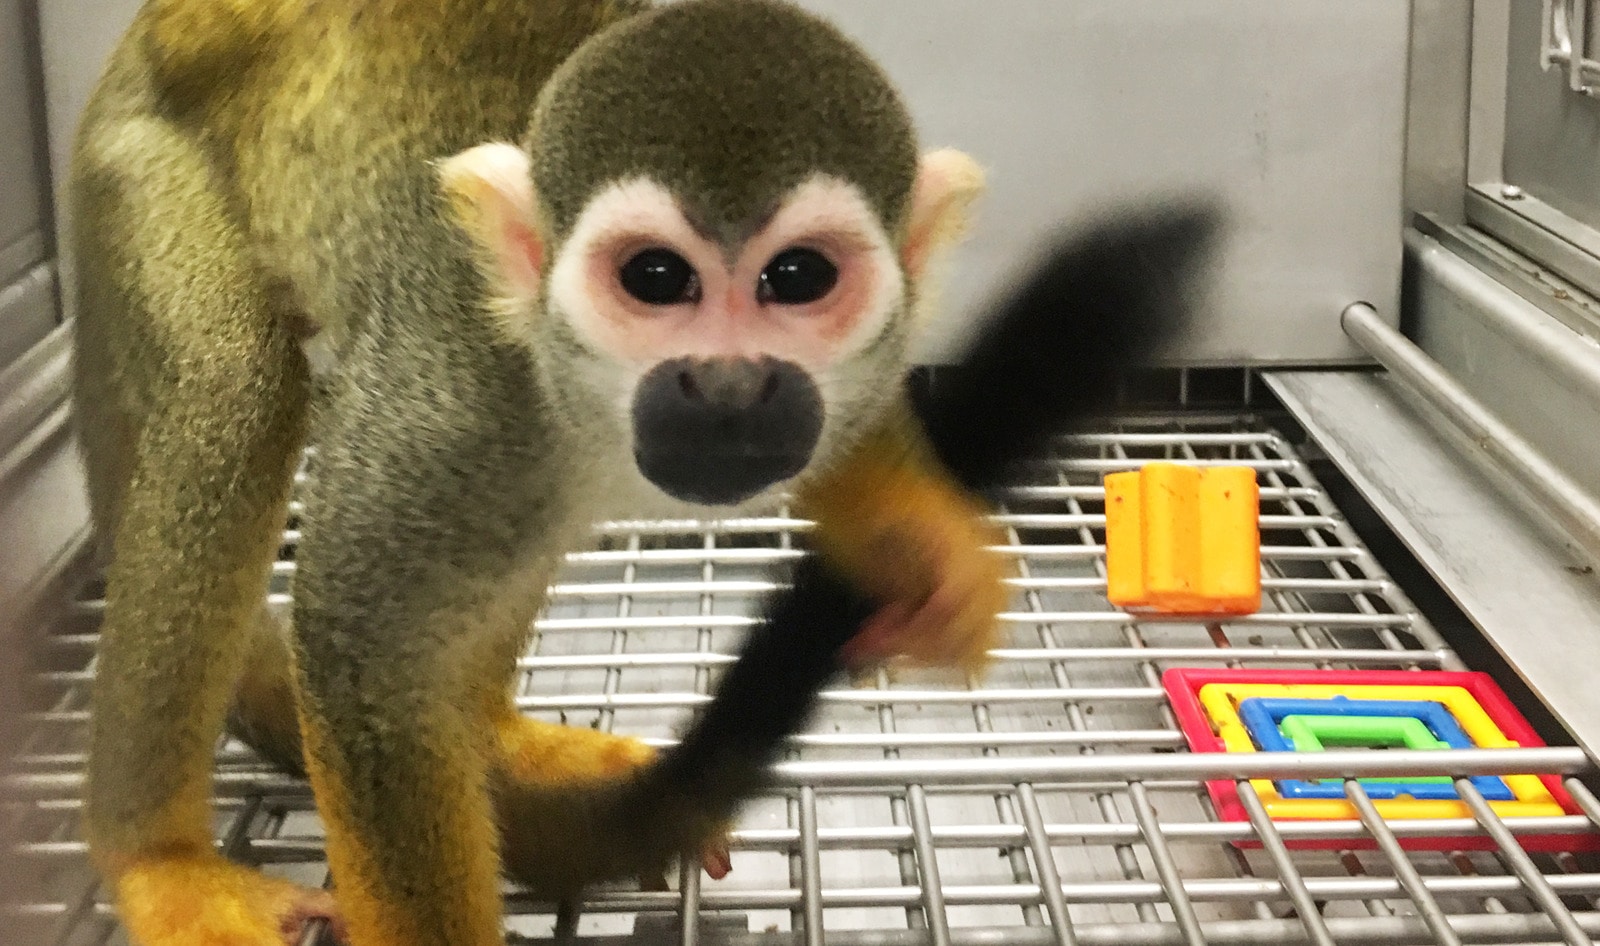 FDA Retires Primates From Its Labs For the First Time